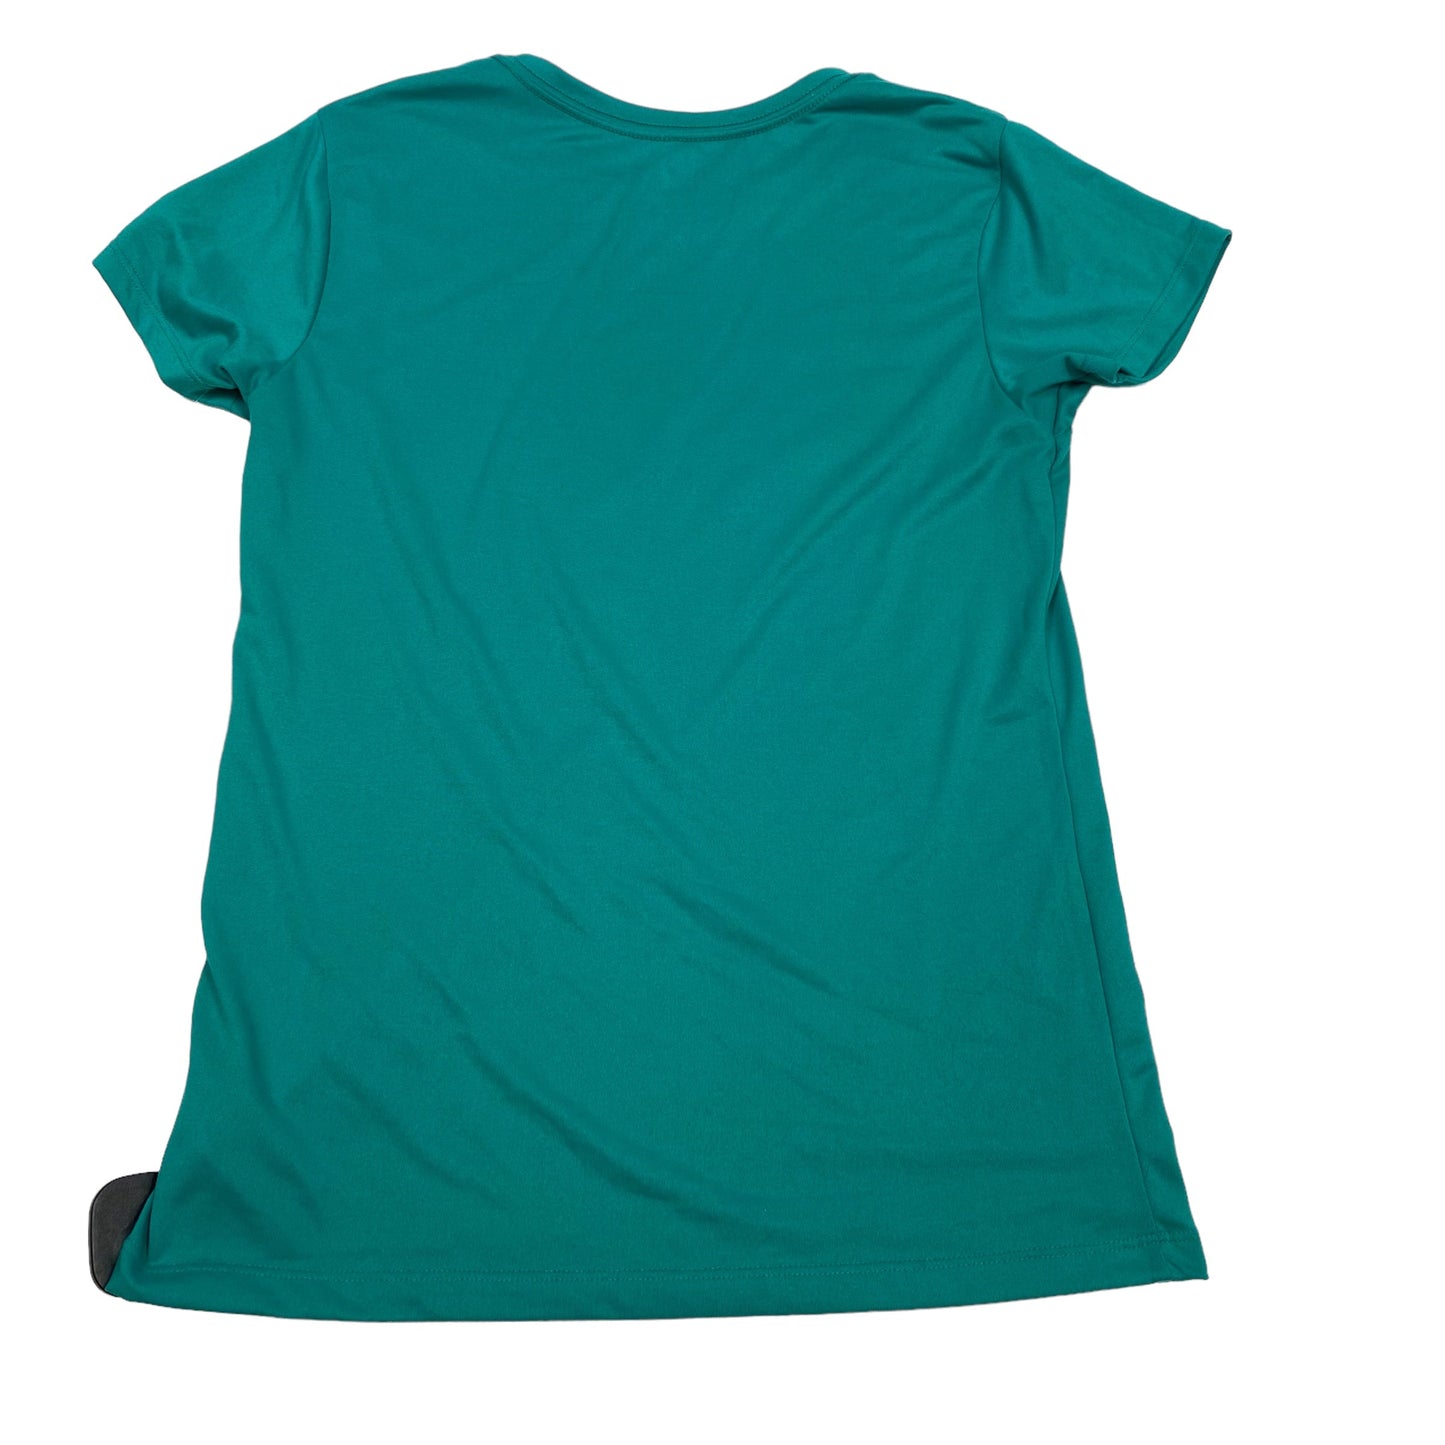 Green Athletic Top Short Sleeve The North Face, Size M